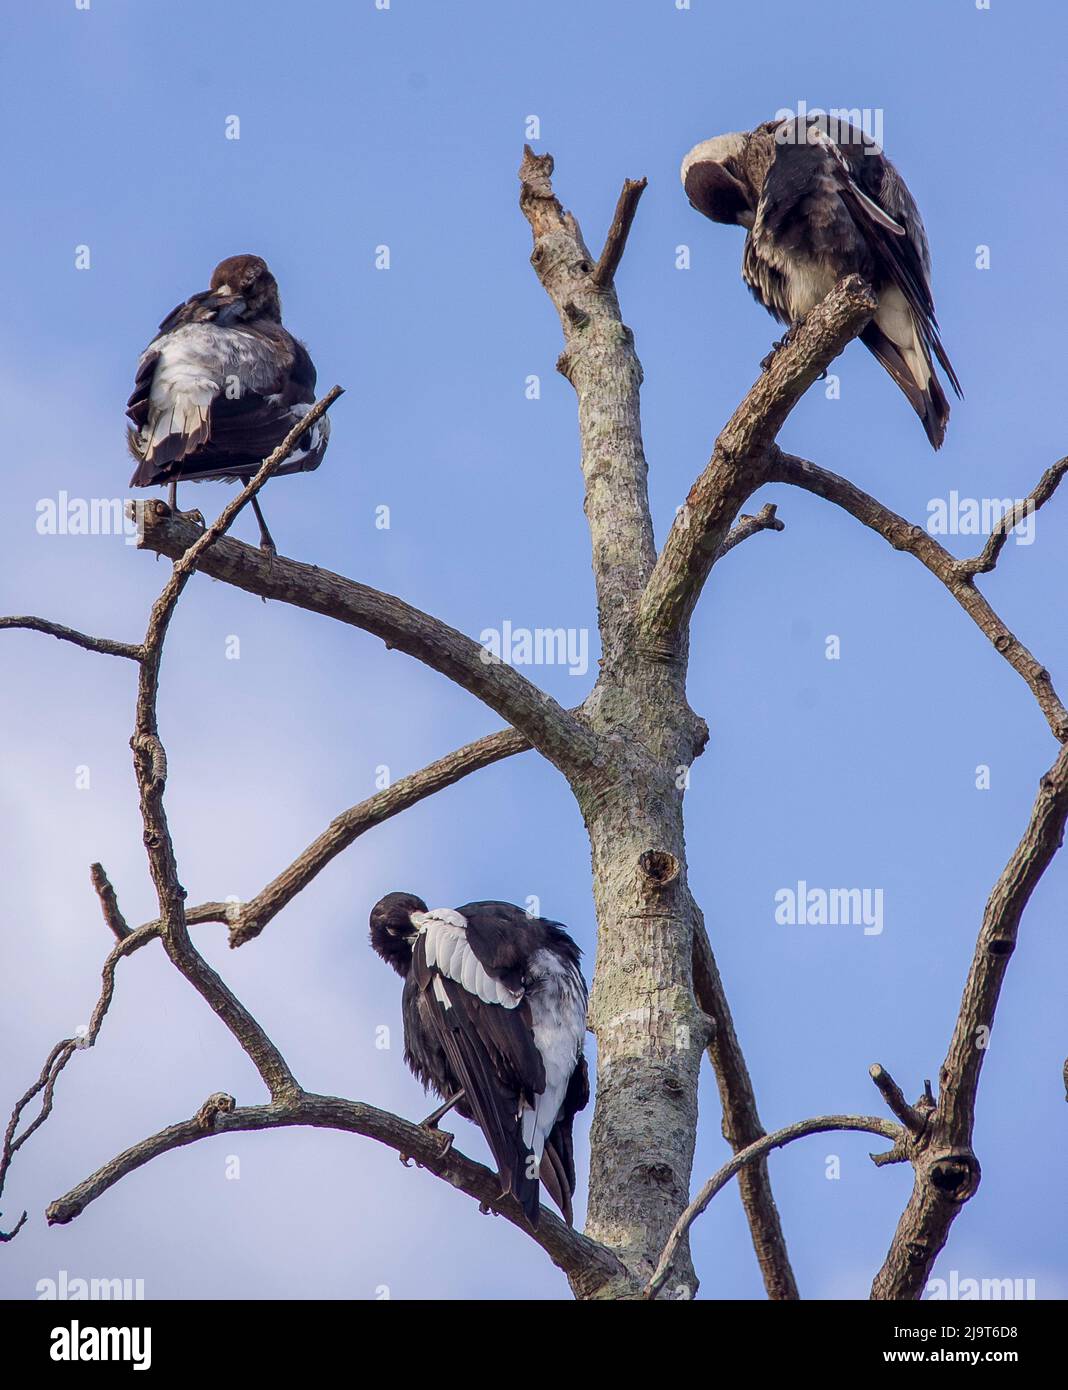 Three very young Australian magpies, cracticus tibicen, perched in dead tree,  all preening together, enjoying summer sunshine and blue sky. Stock Photo